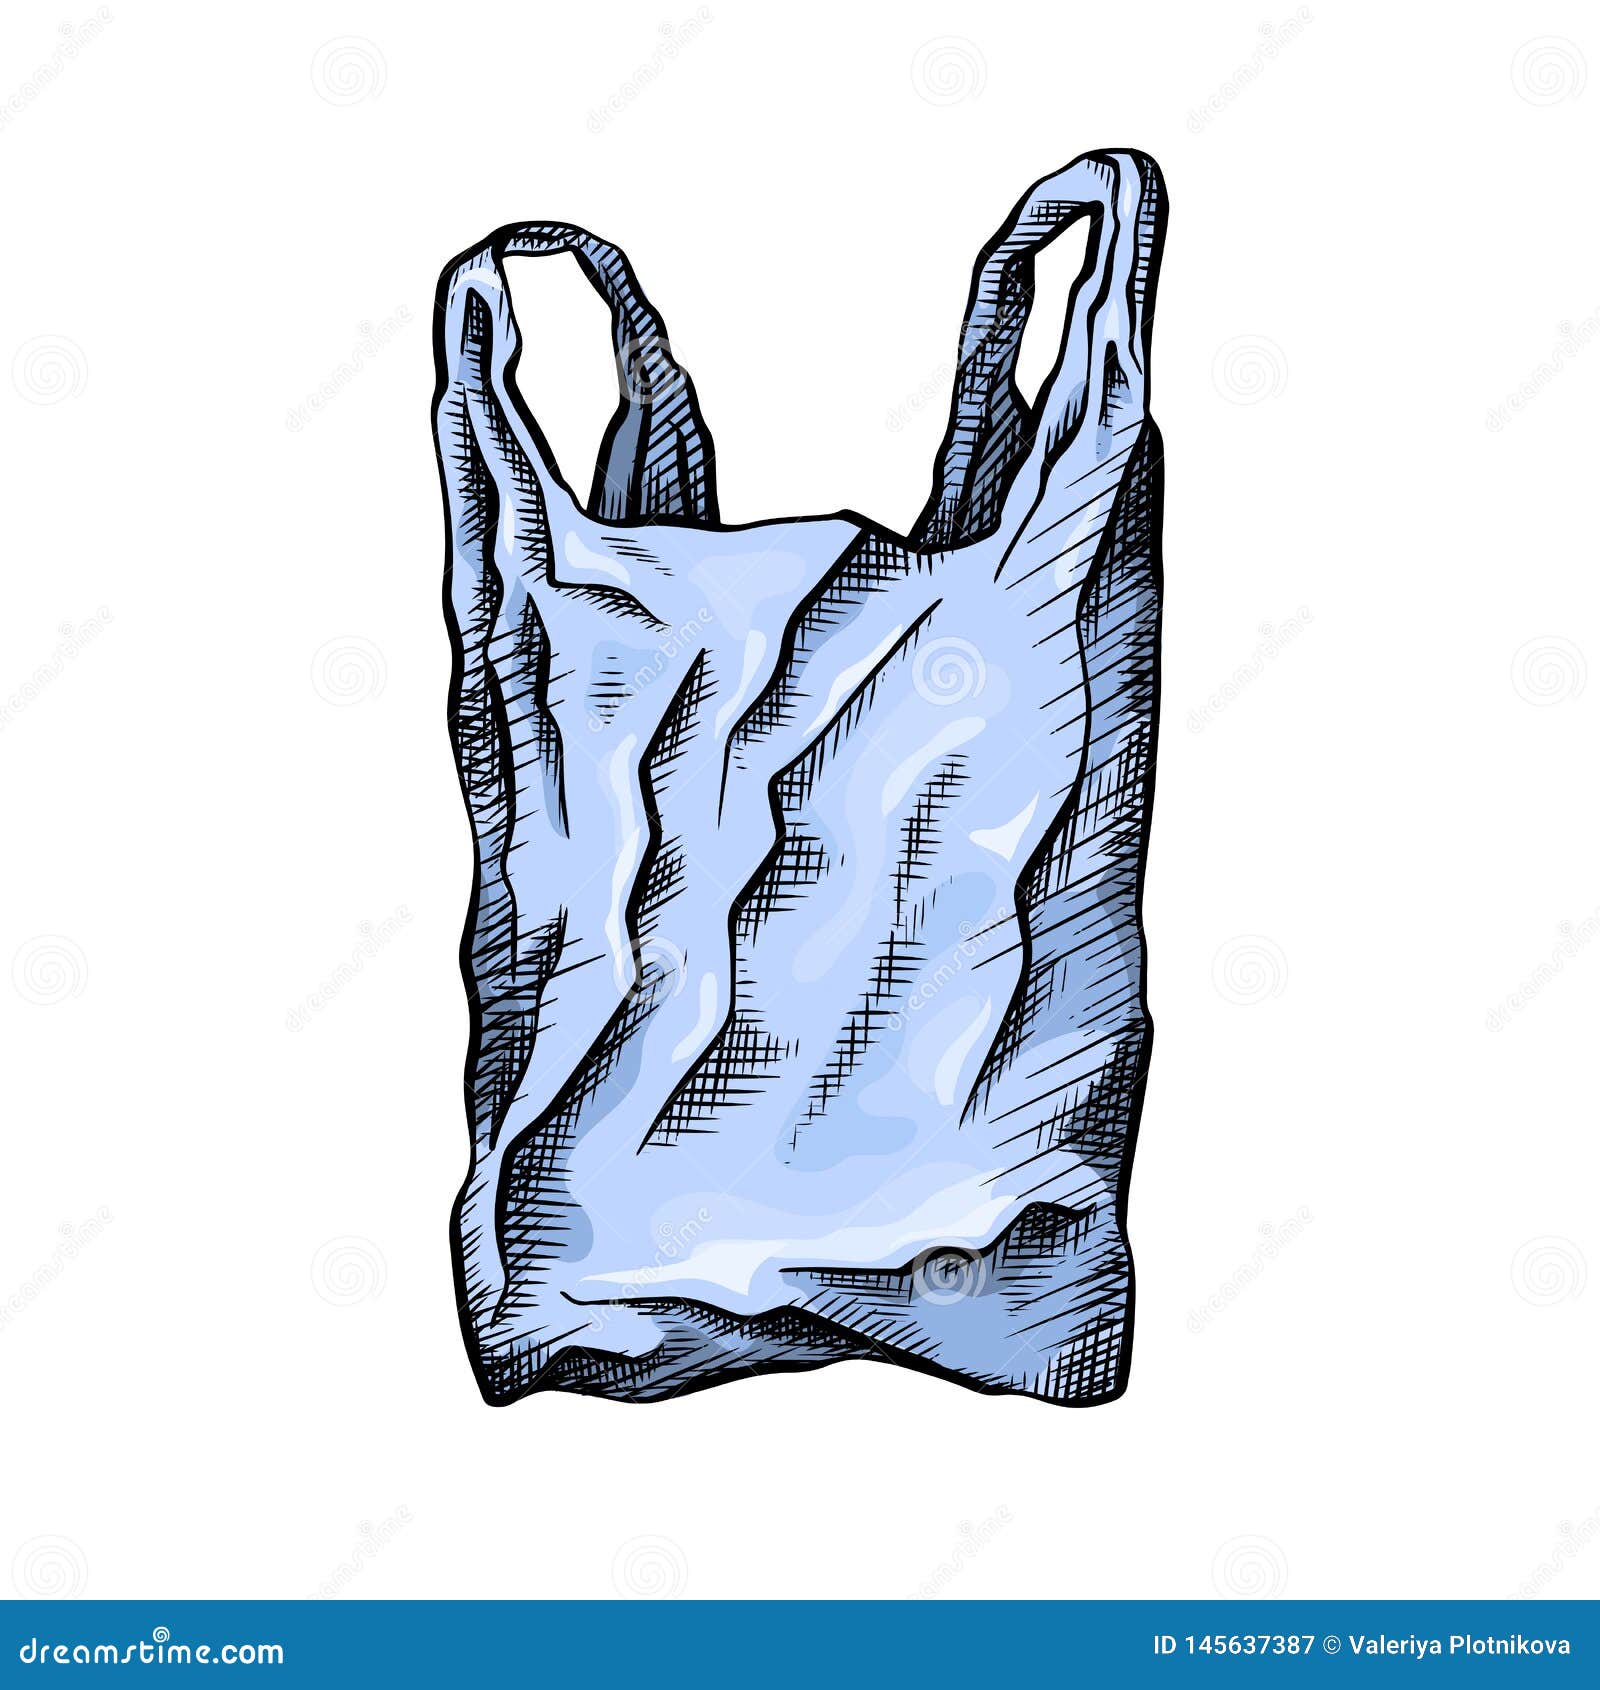 coloring line drawing plastic bag environmental pollution object separate background vector scribble your 145637387